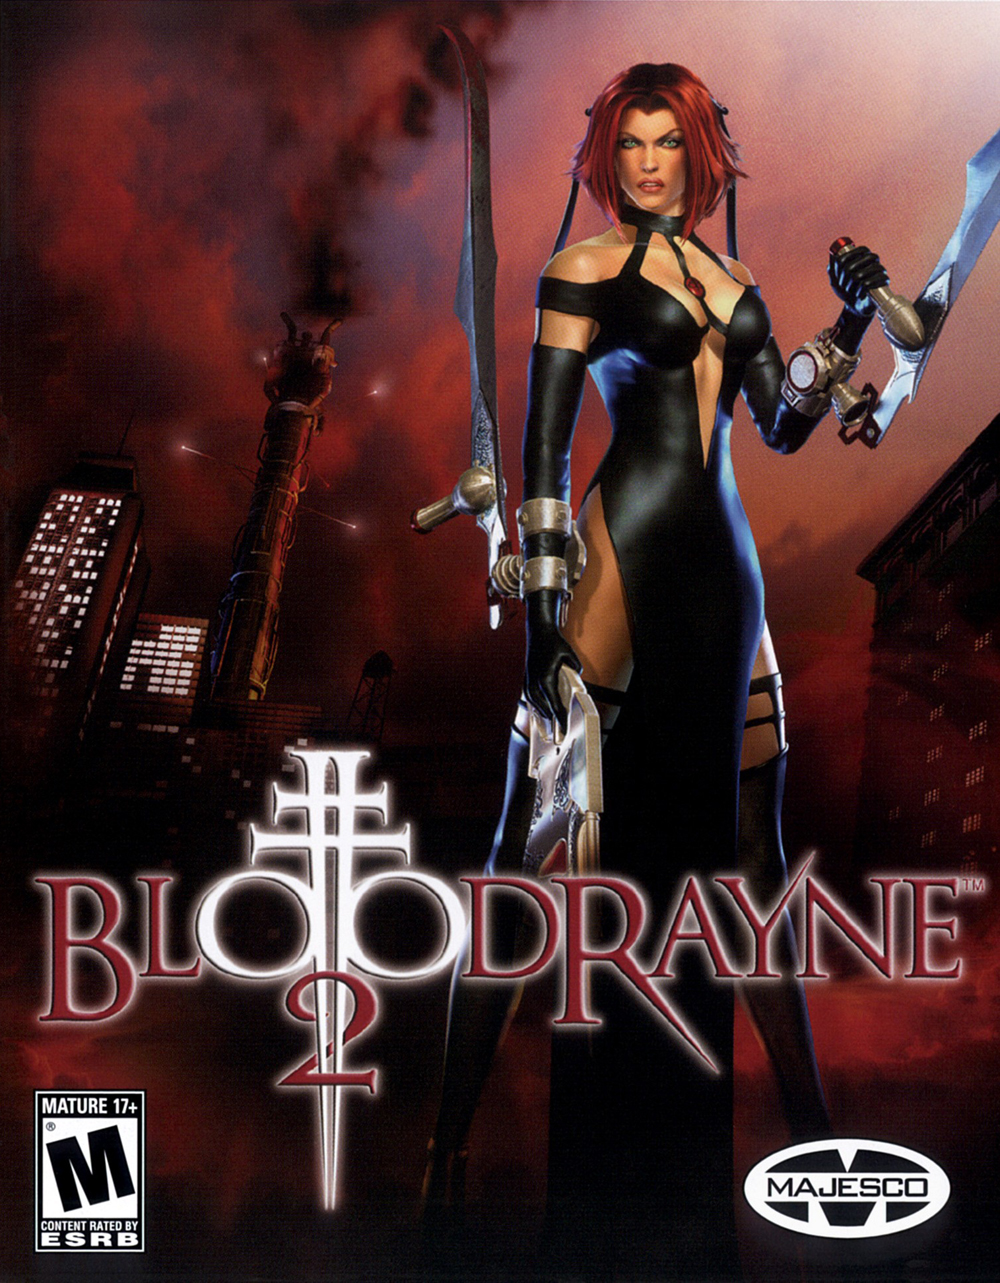 Nice Images Collection: Bloodrayne Desktop Wallpapers